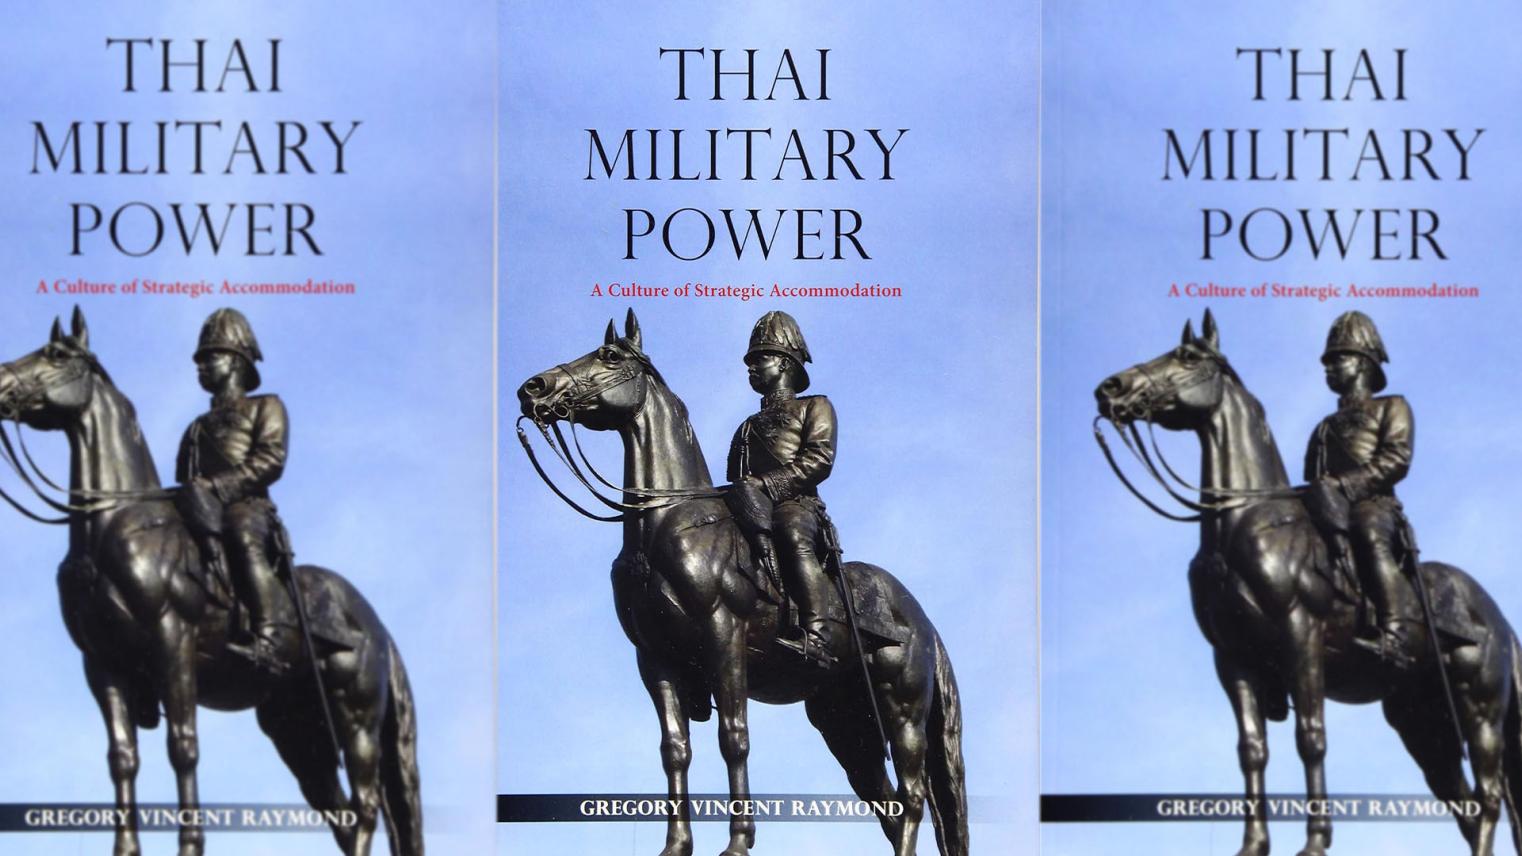 Thai Military Power: A Culture of Strategic Accommodation